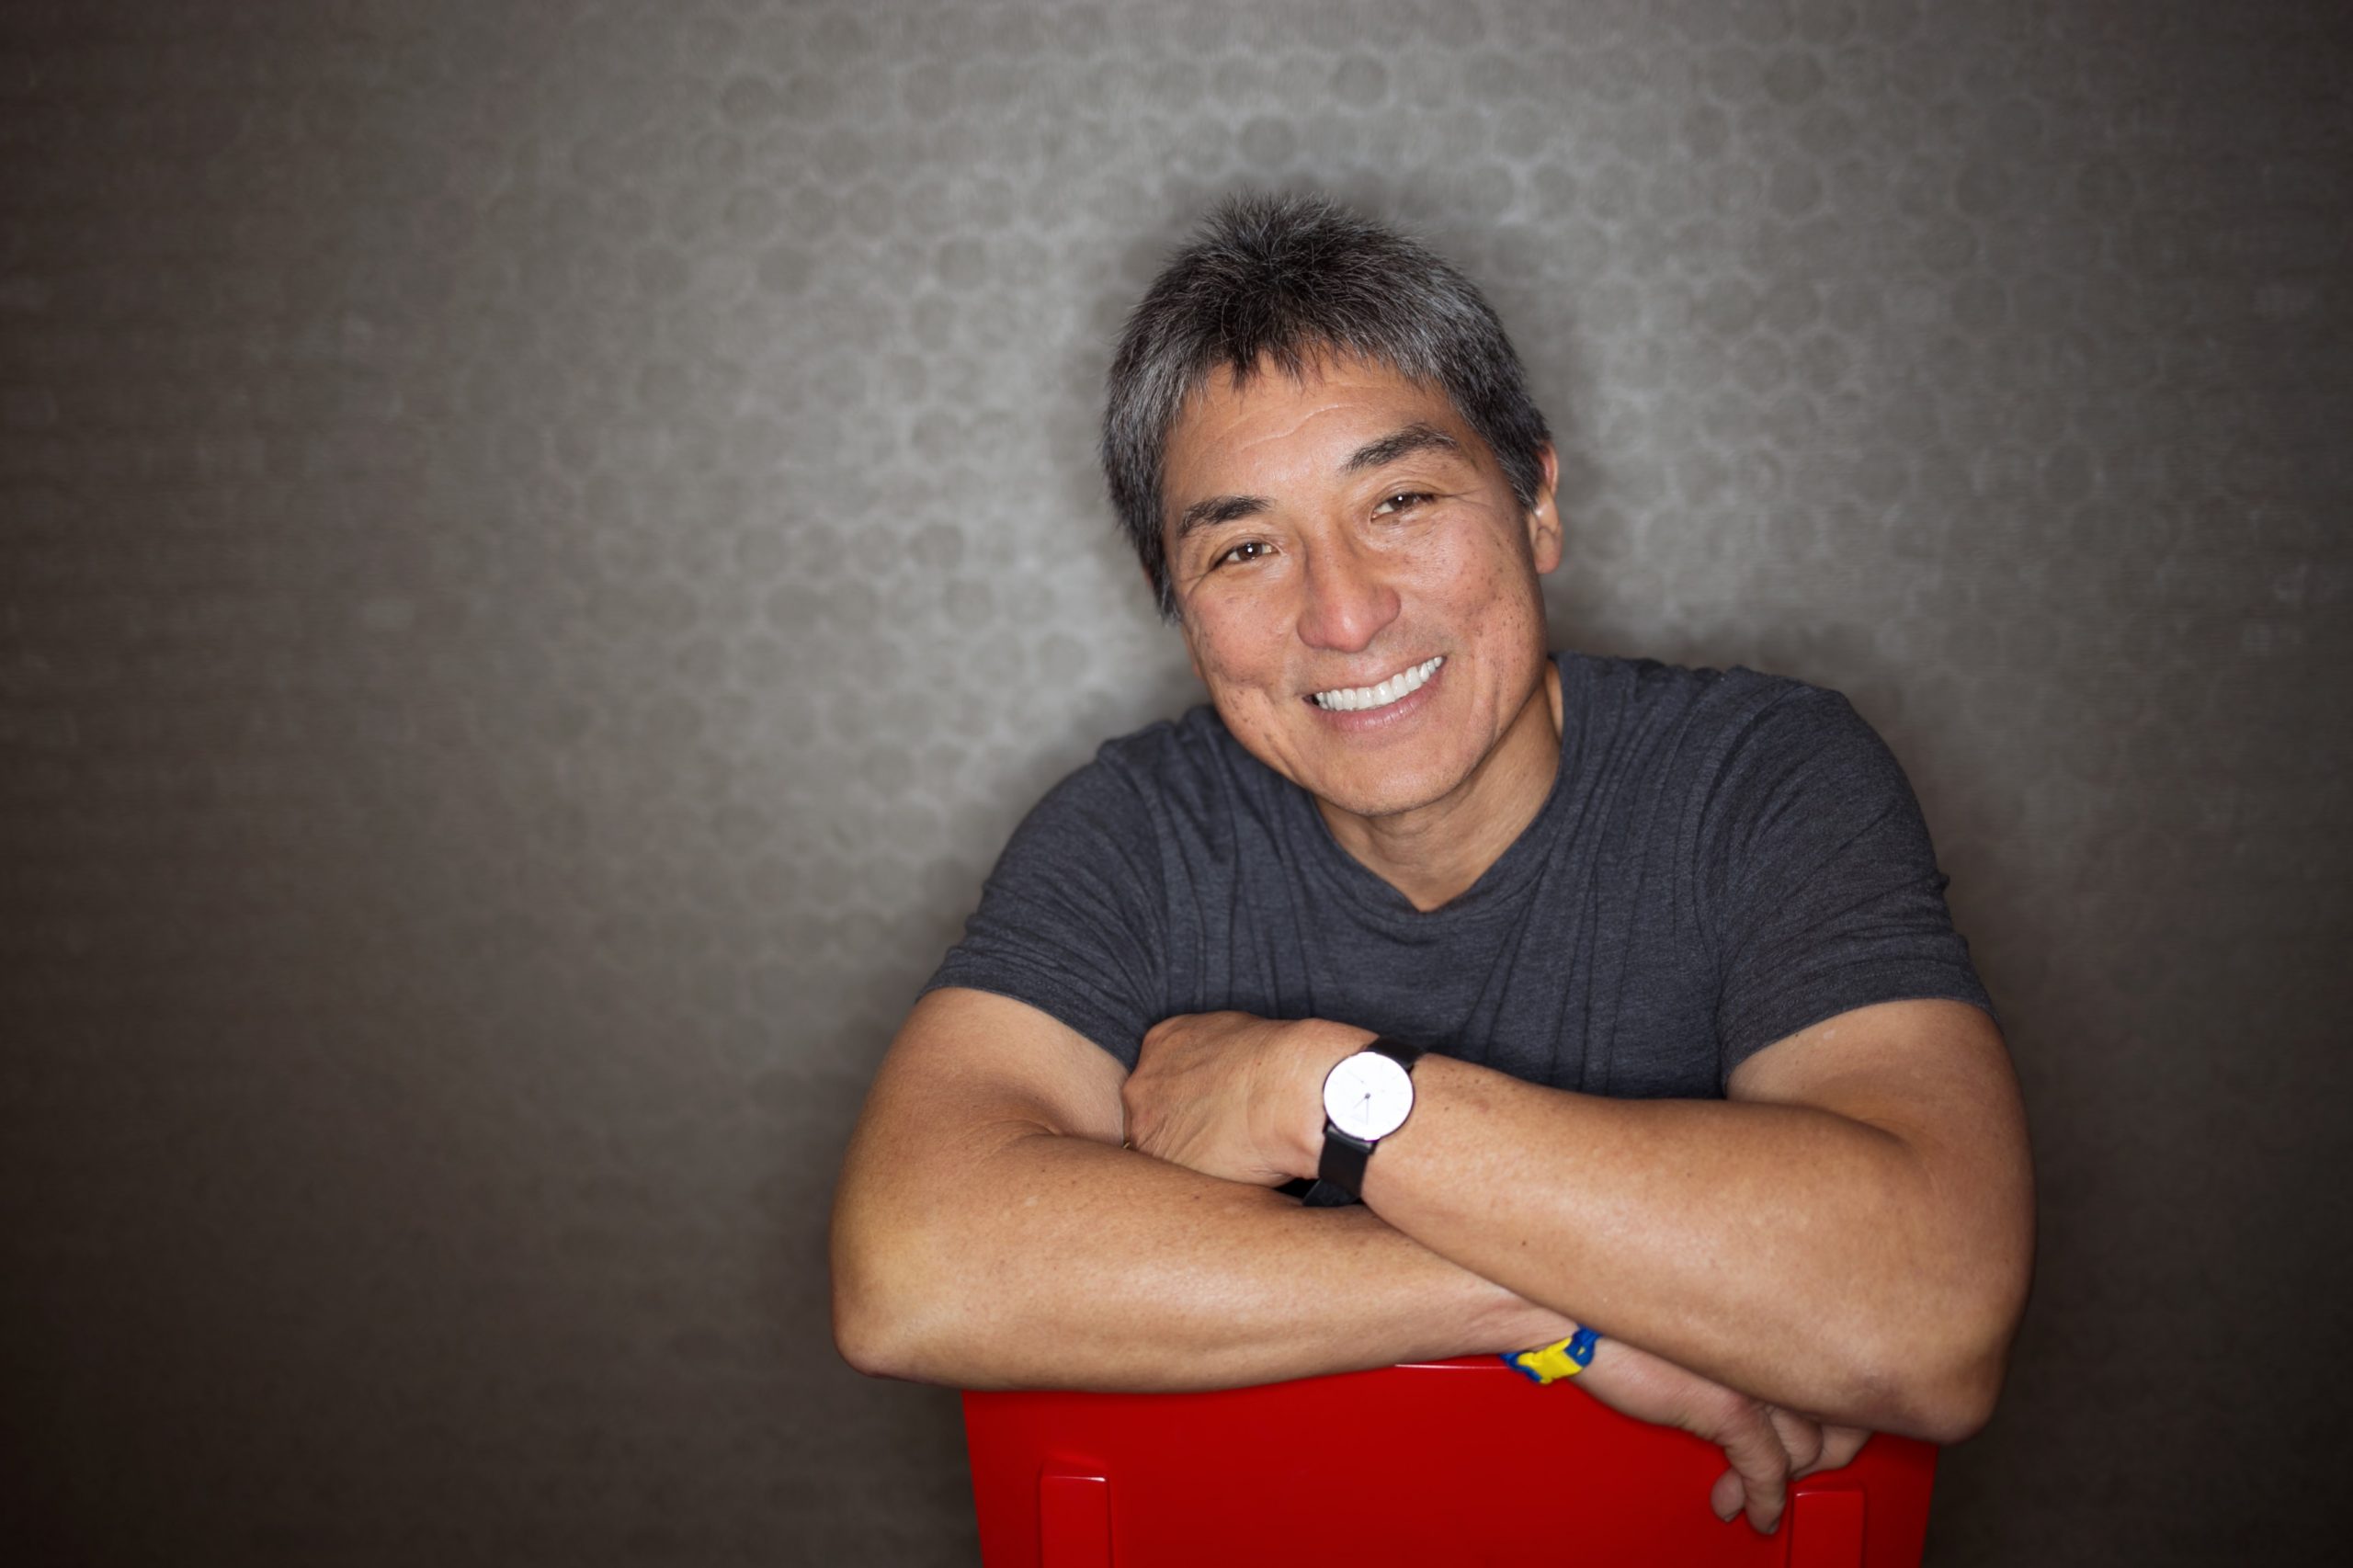 Guy Kawasaki helps startup founders become successful